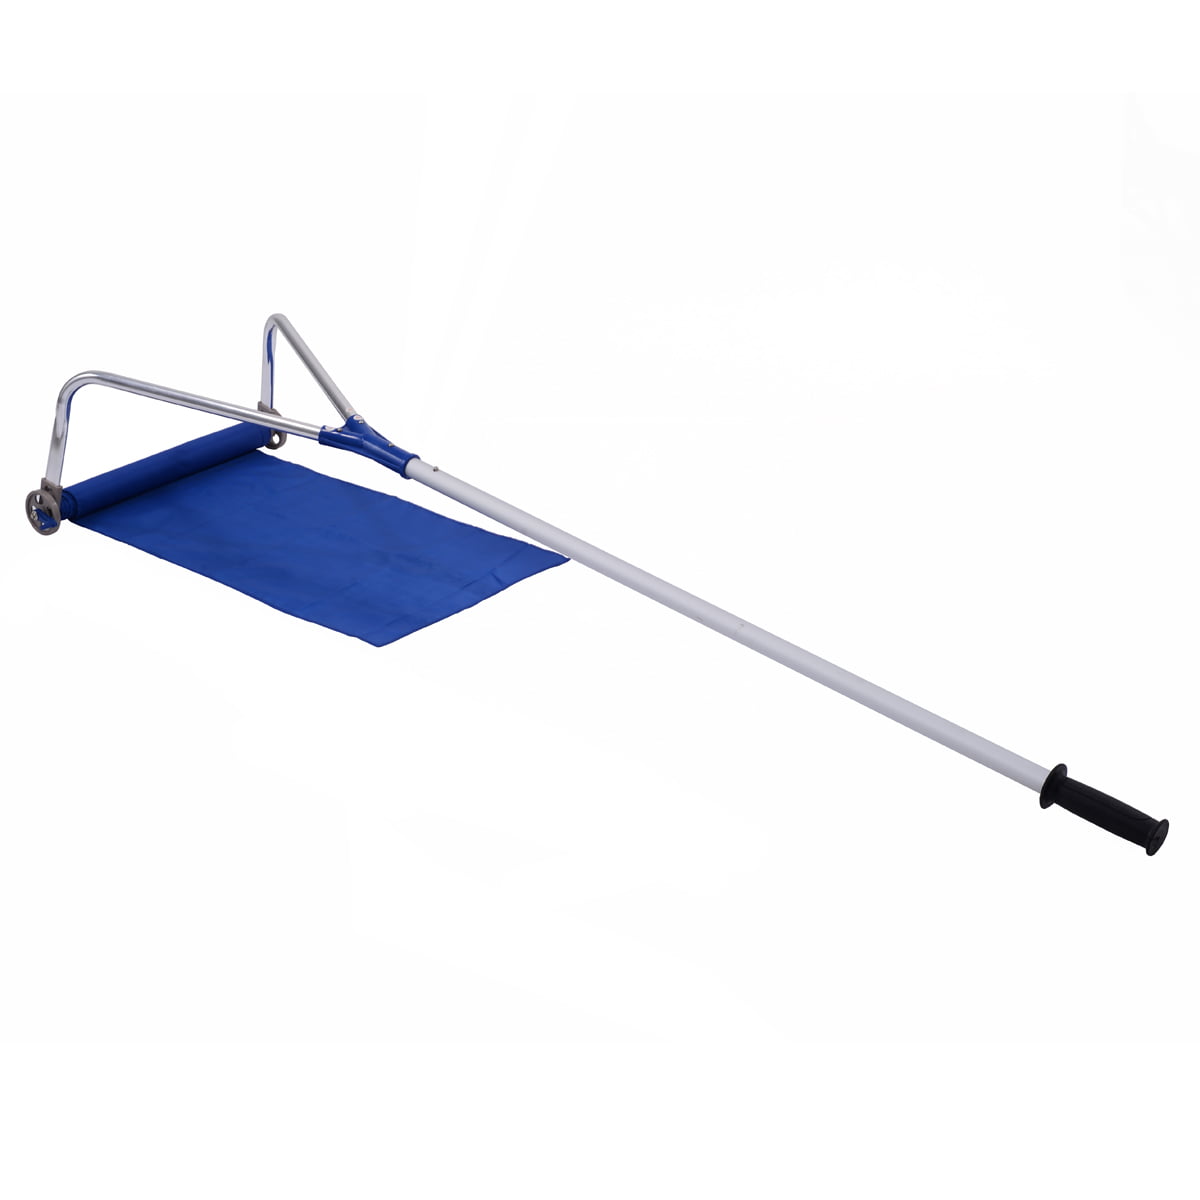 Topbuy Roof Snow Removal Rake 20FT with Adjustable Telescoping Handle